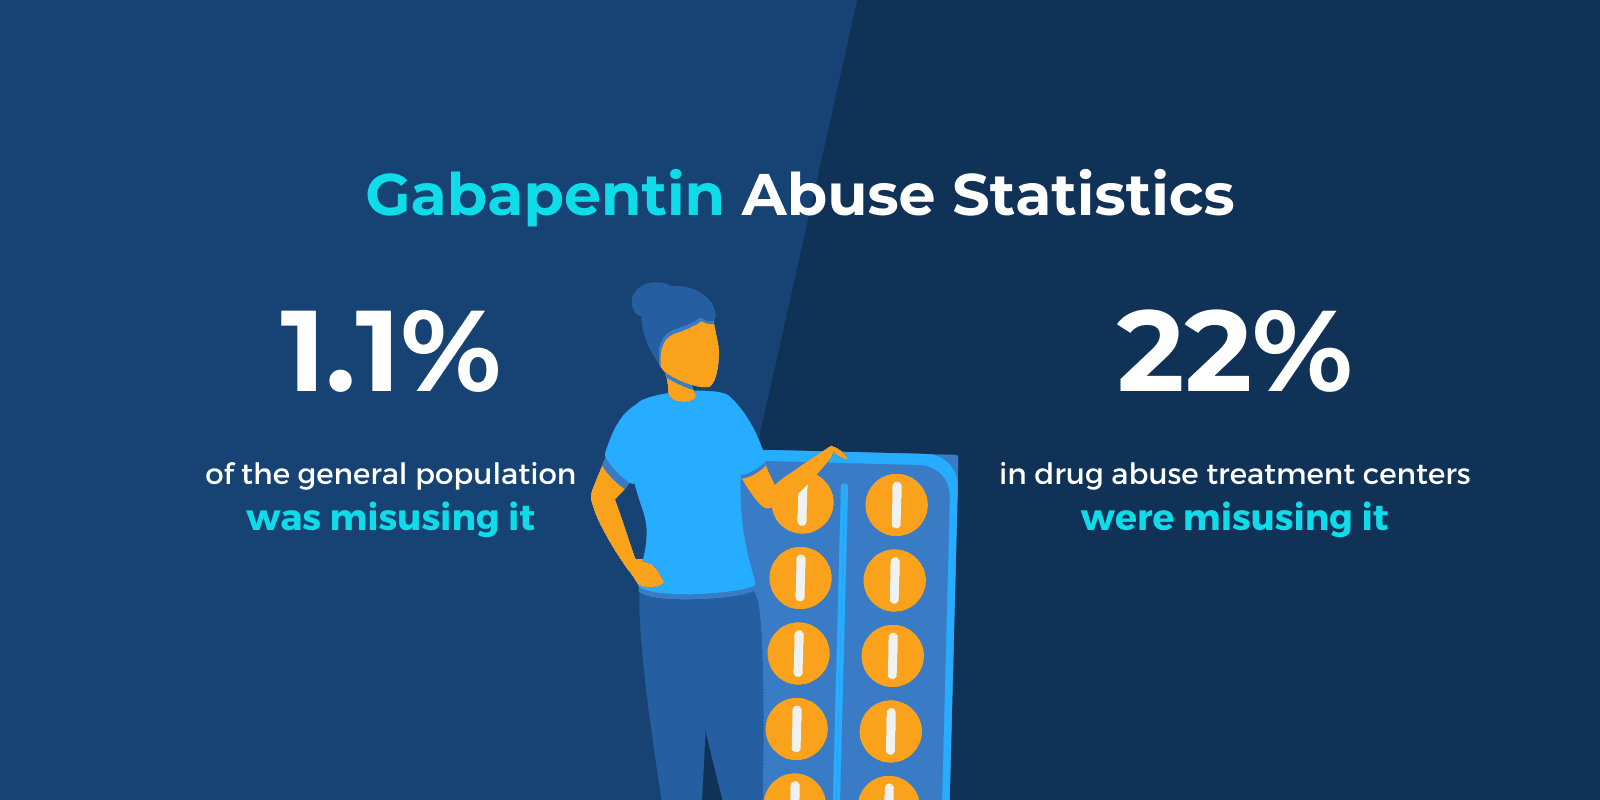 "Gabapentin abuse statistics: 1.1% of the general population was misusing it and 22% in drug abuse treatment centers were misusing it" text is written and an illustration of a woman holding a tablet of gabapentin is in between the two statistics.